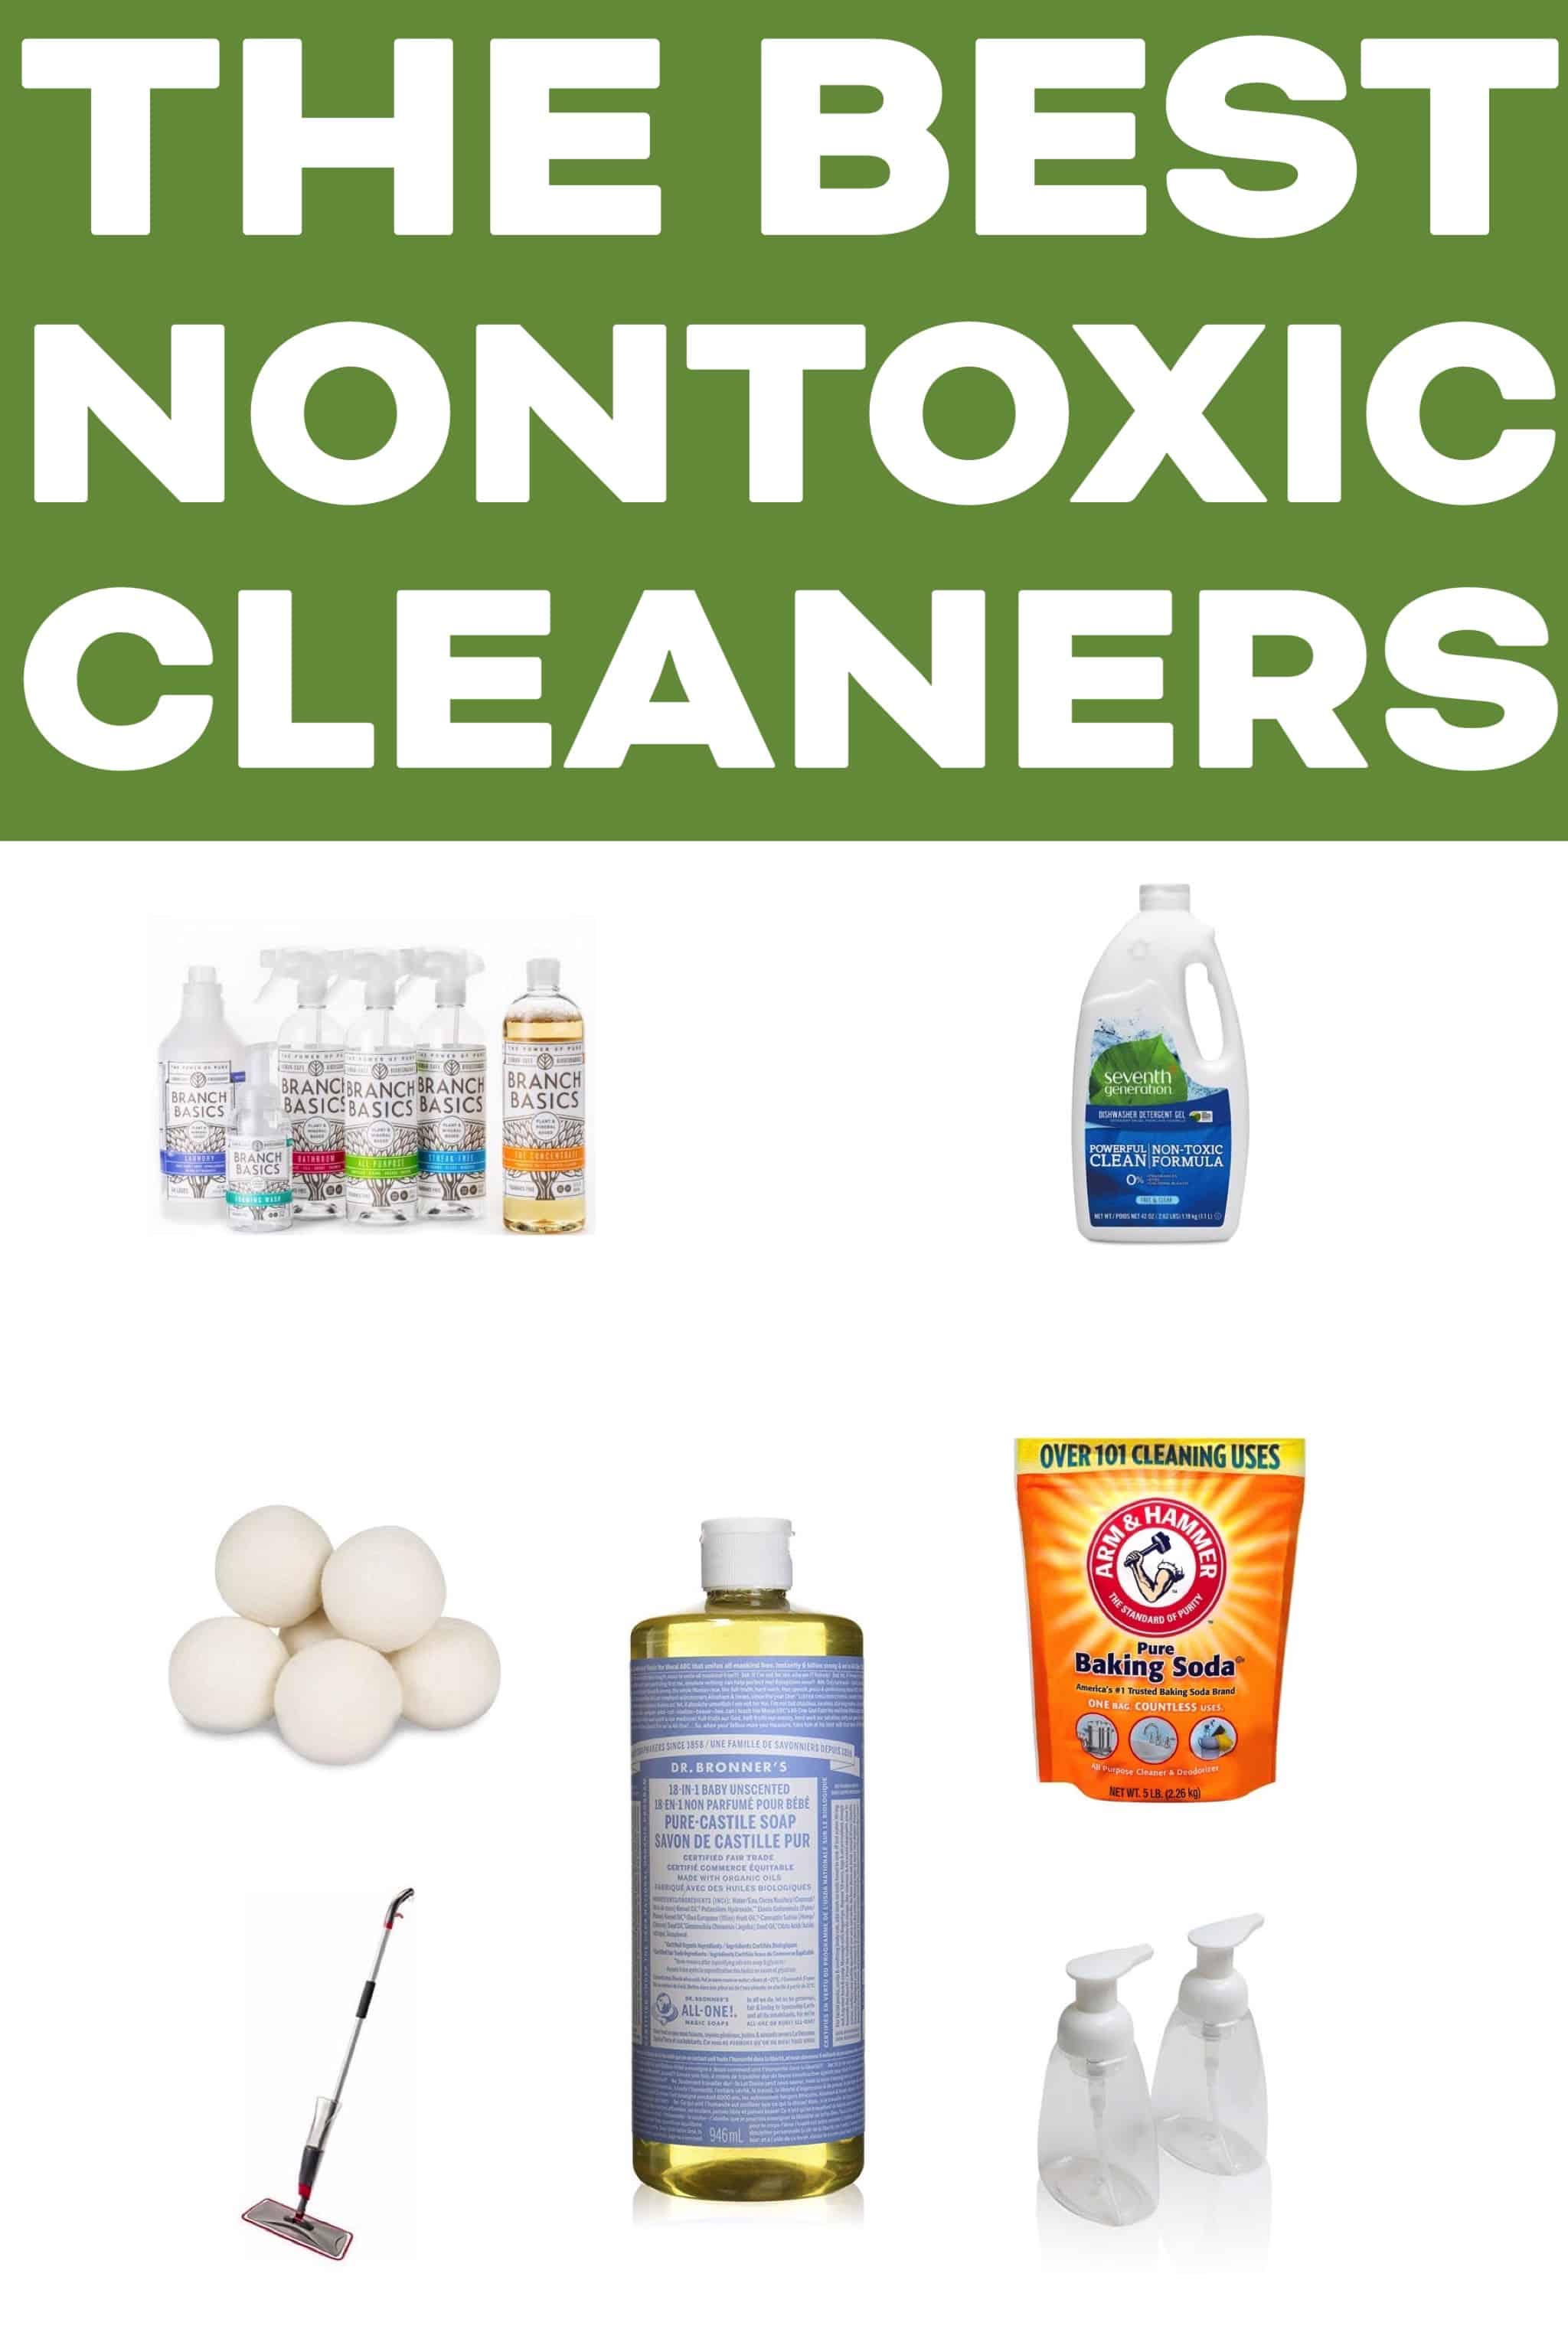 Non-Toxic Product Guides for Home & Lifestyle Needs